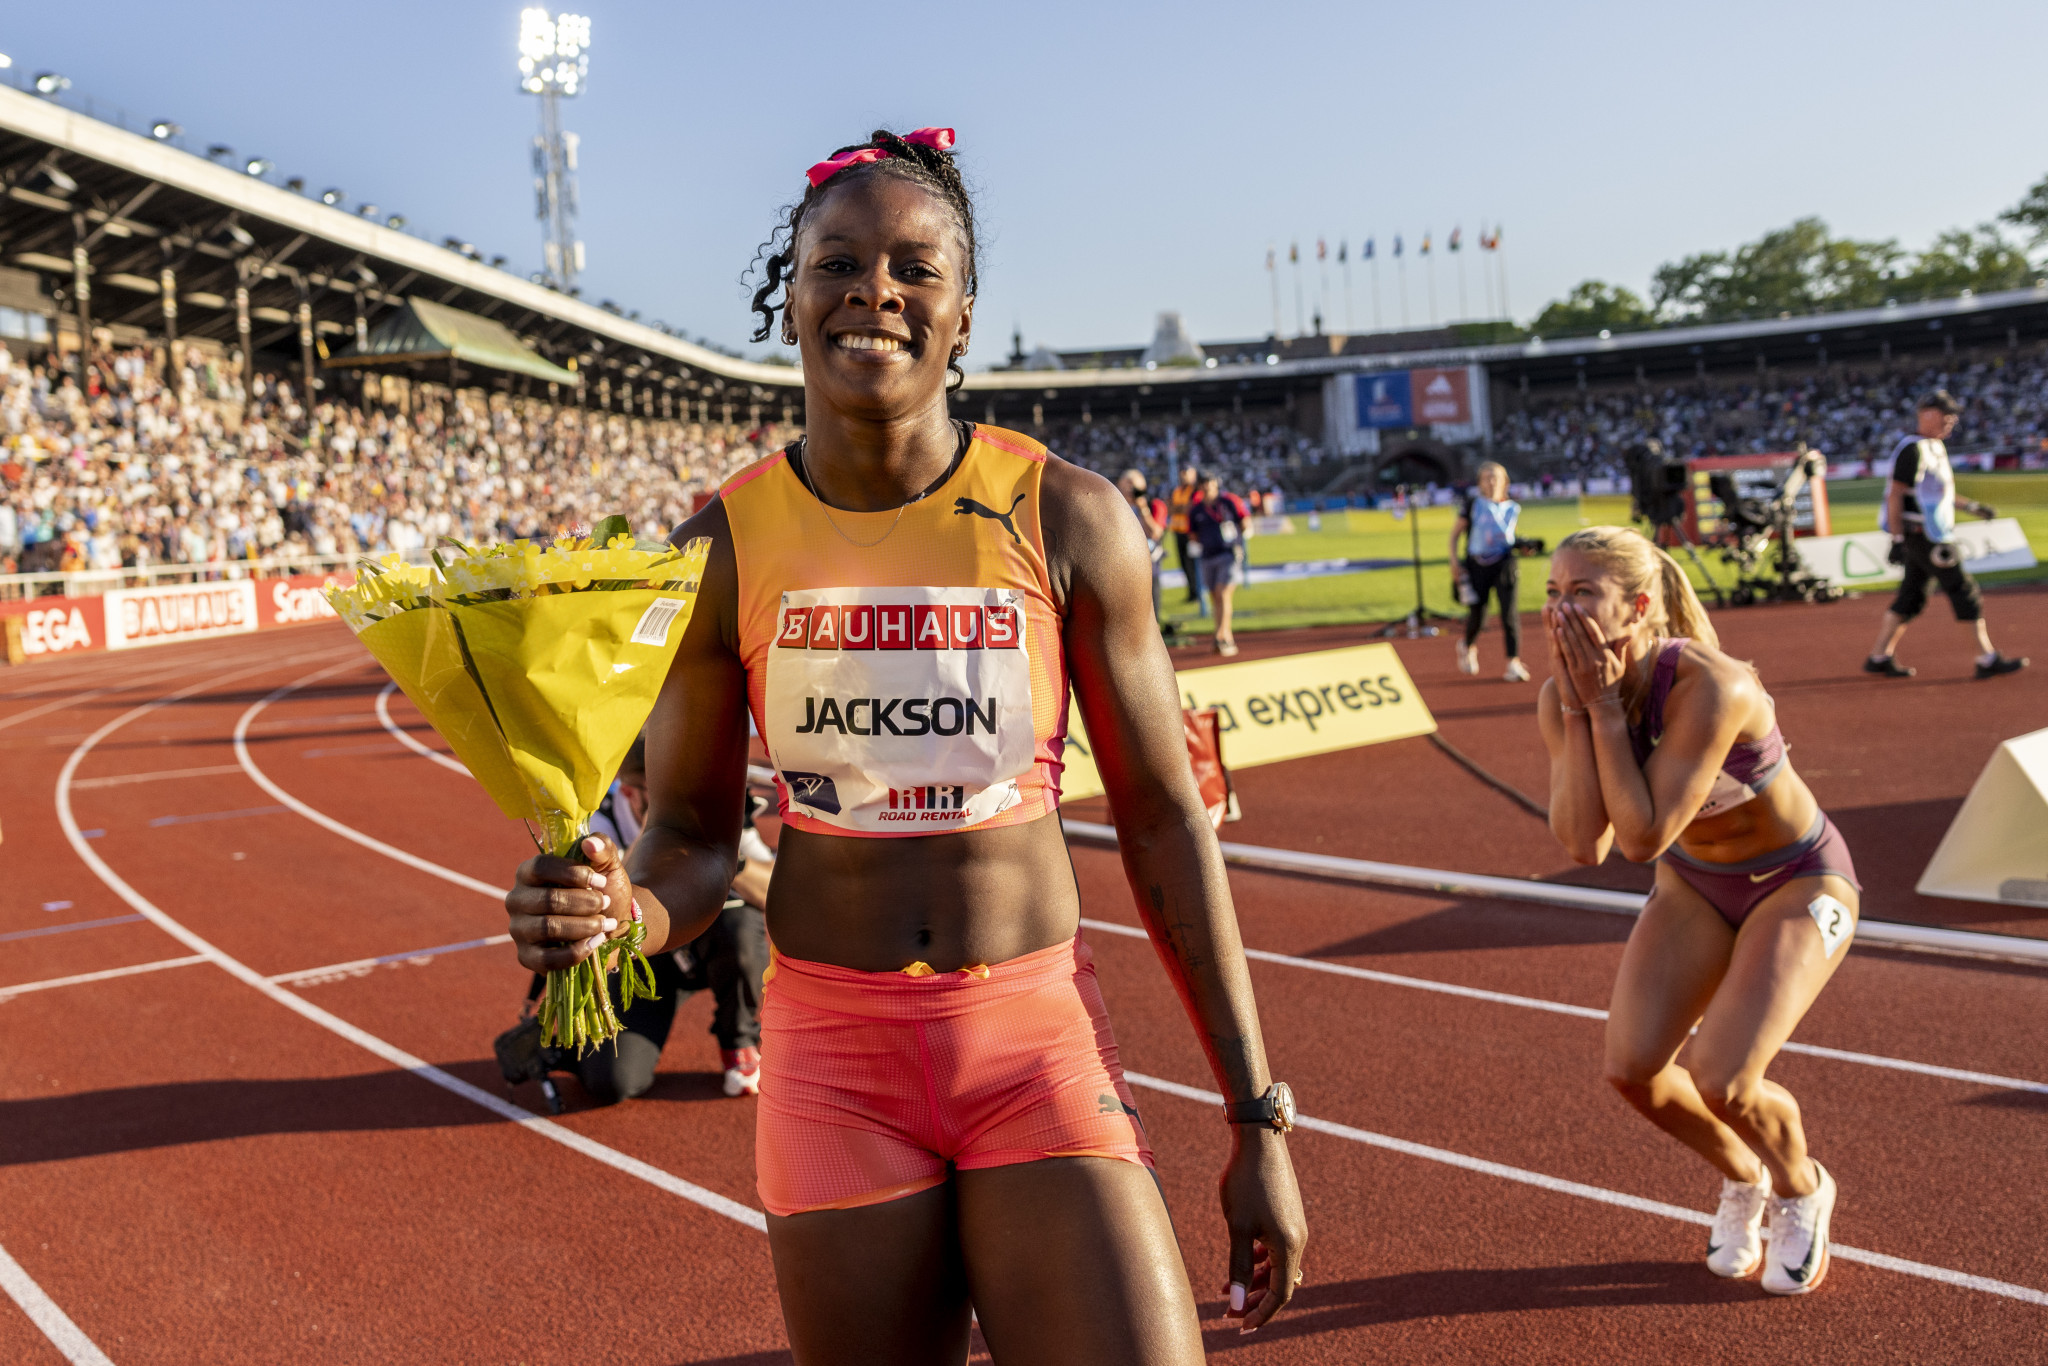 Shericka Jackson could be the star of the show in the women's 200m race. GETTY IMAGES